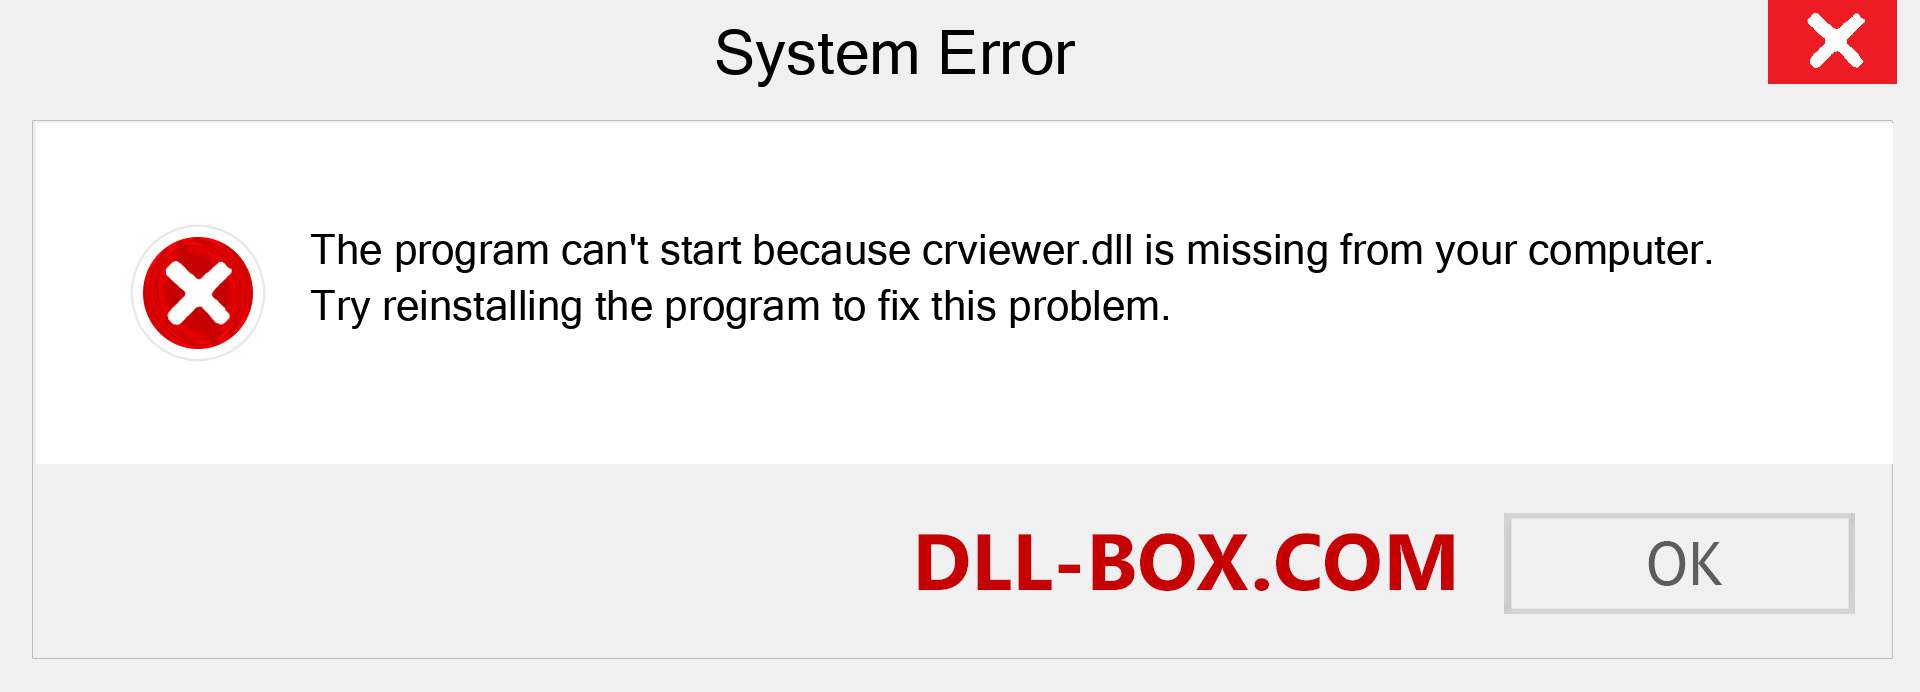  crviewer.dll file is missing?. Download for Windows 7, 8, 10 - Fix  crviewer dll Missing Error on Windows, photos, images